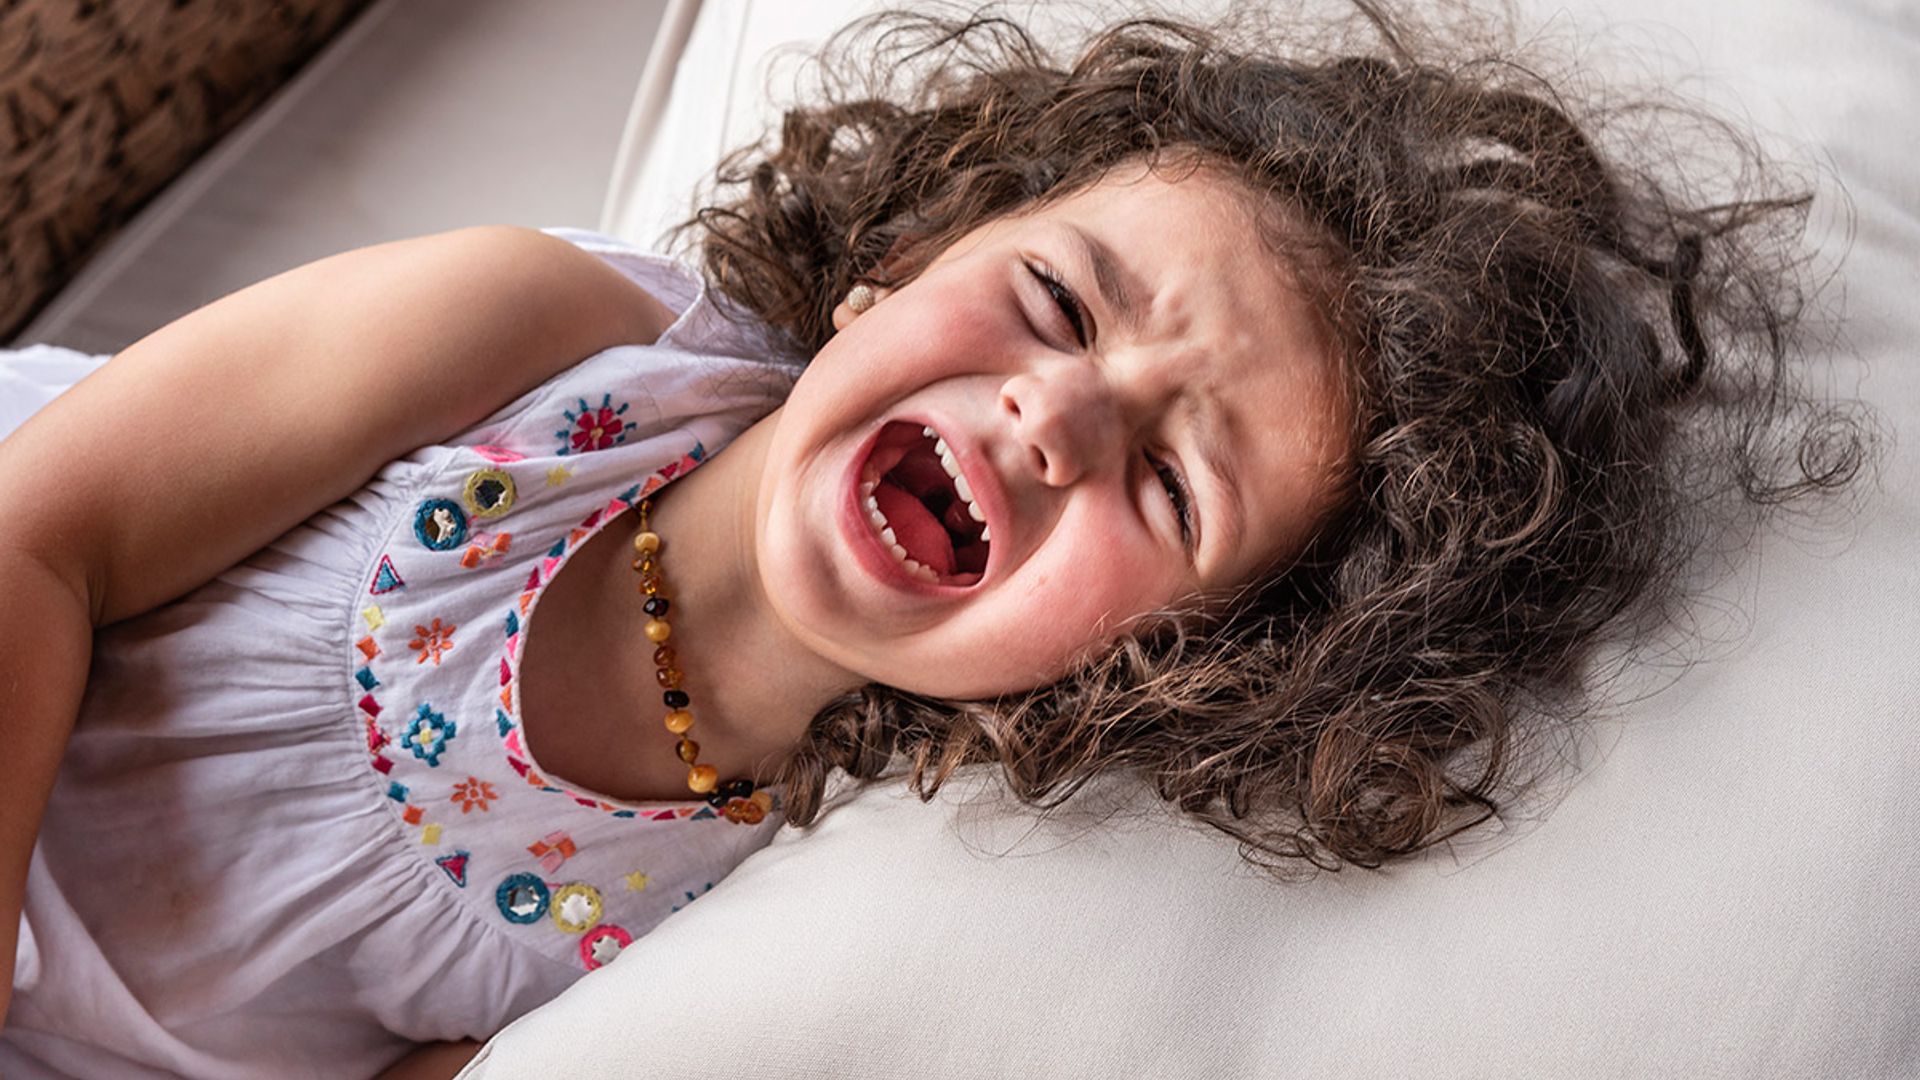 How to deal with toddler tantrums - 5 tips a parenting coach wants you to know